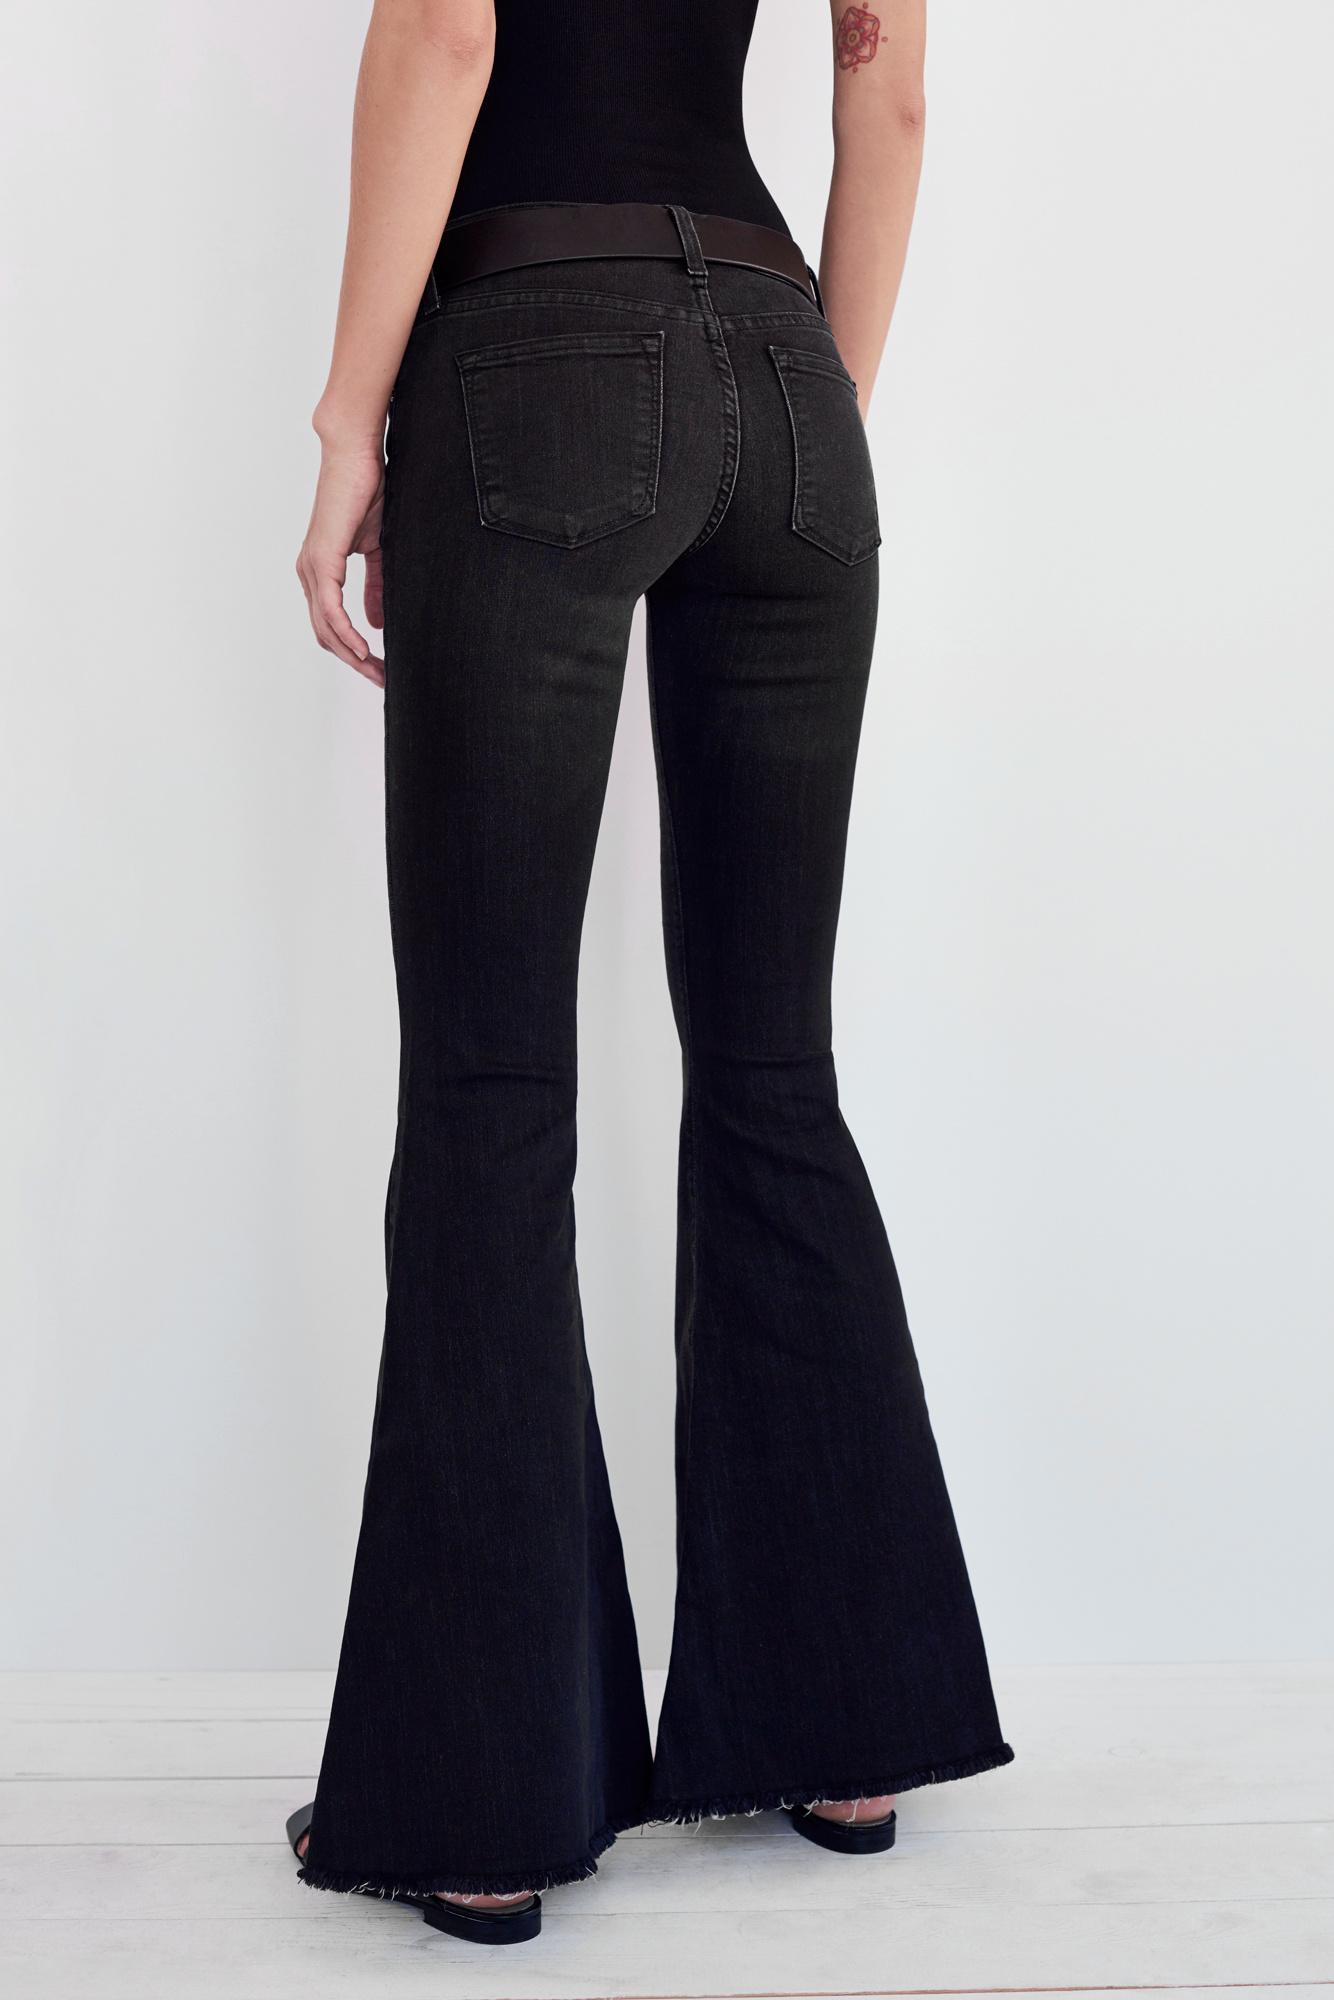 Free People Denim Super Flare Jeans By We The Free in Gray - Lyst